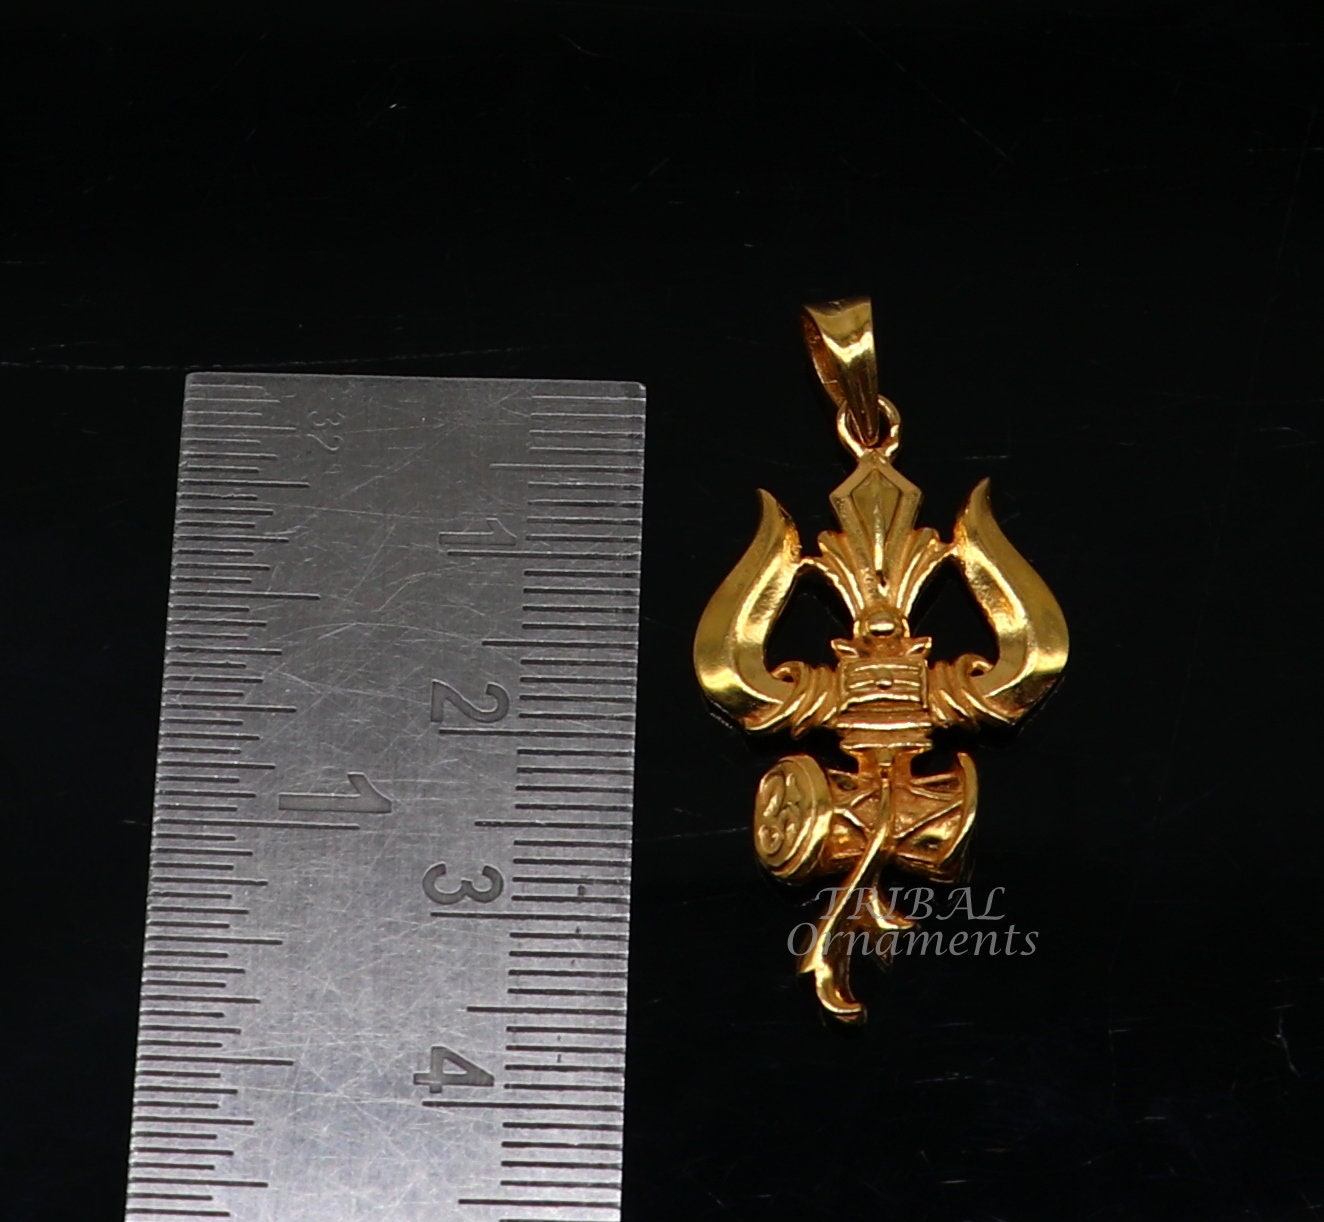 925 sterling silver Gold polished idol Lord Shiva trident pendant, amazing vintage design gifting pendant customized god jewelry ssp541 - TRIBAL ORNAMENTS